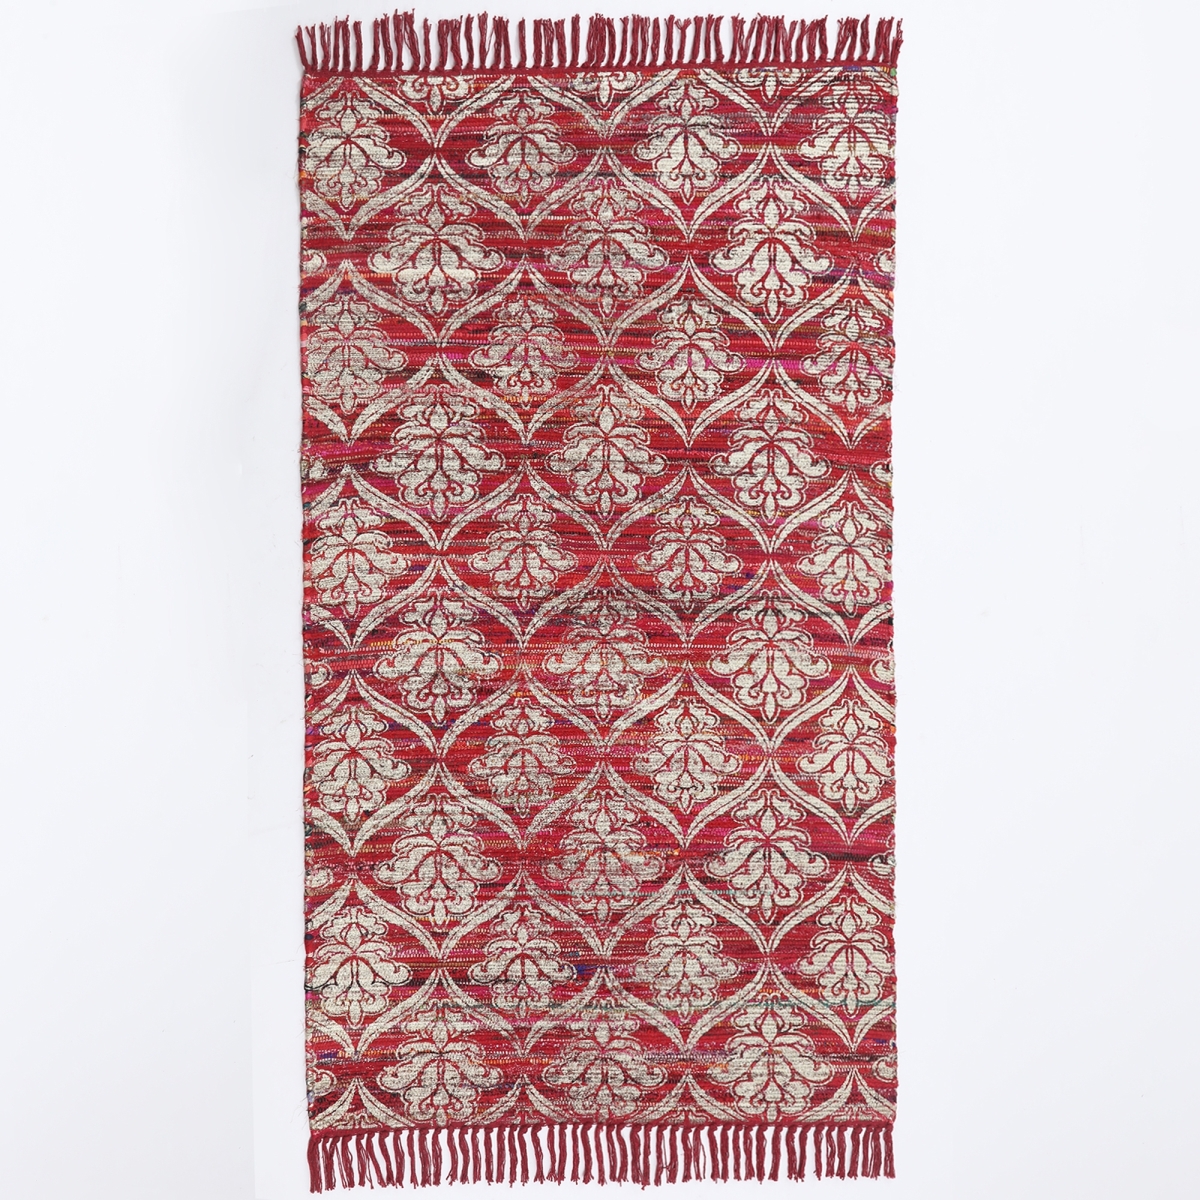 Whtxr639-l 4 X 6 Ft. Handwoven Polyester & Cotton Rug With Metallic Print, Red & White